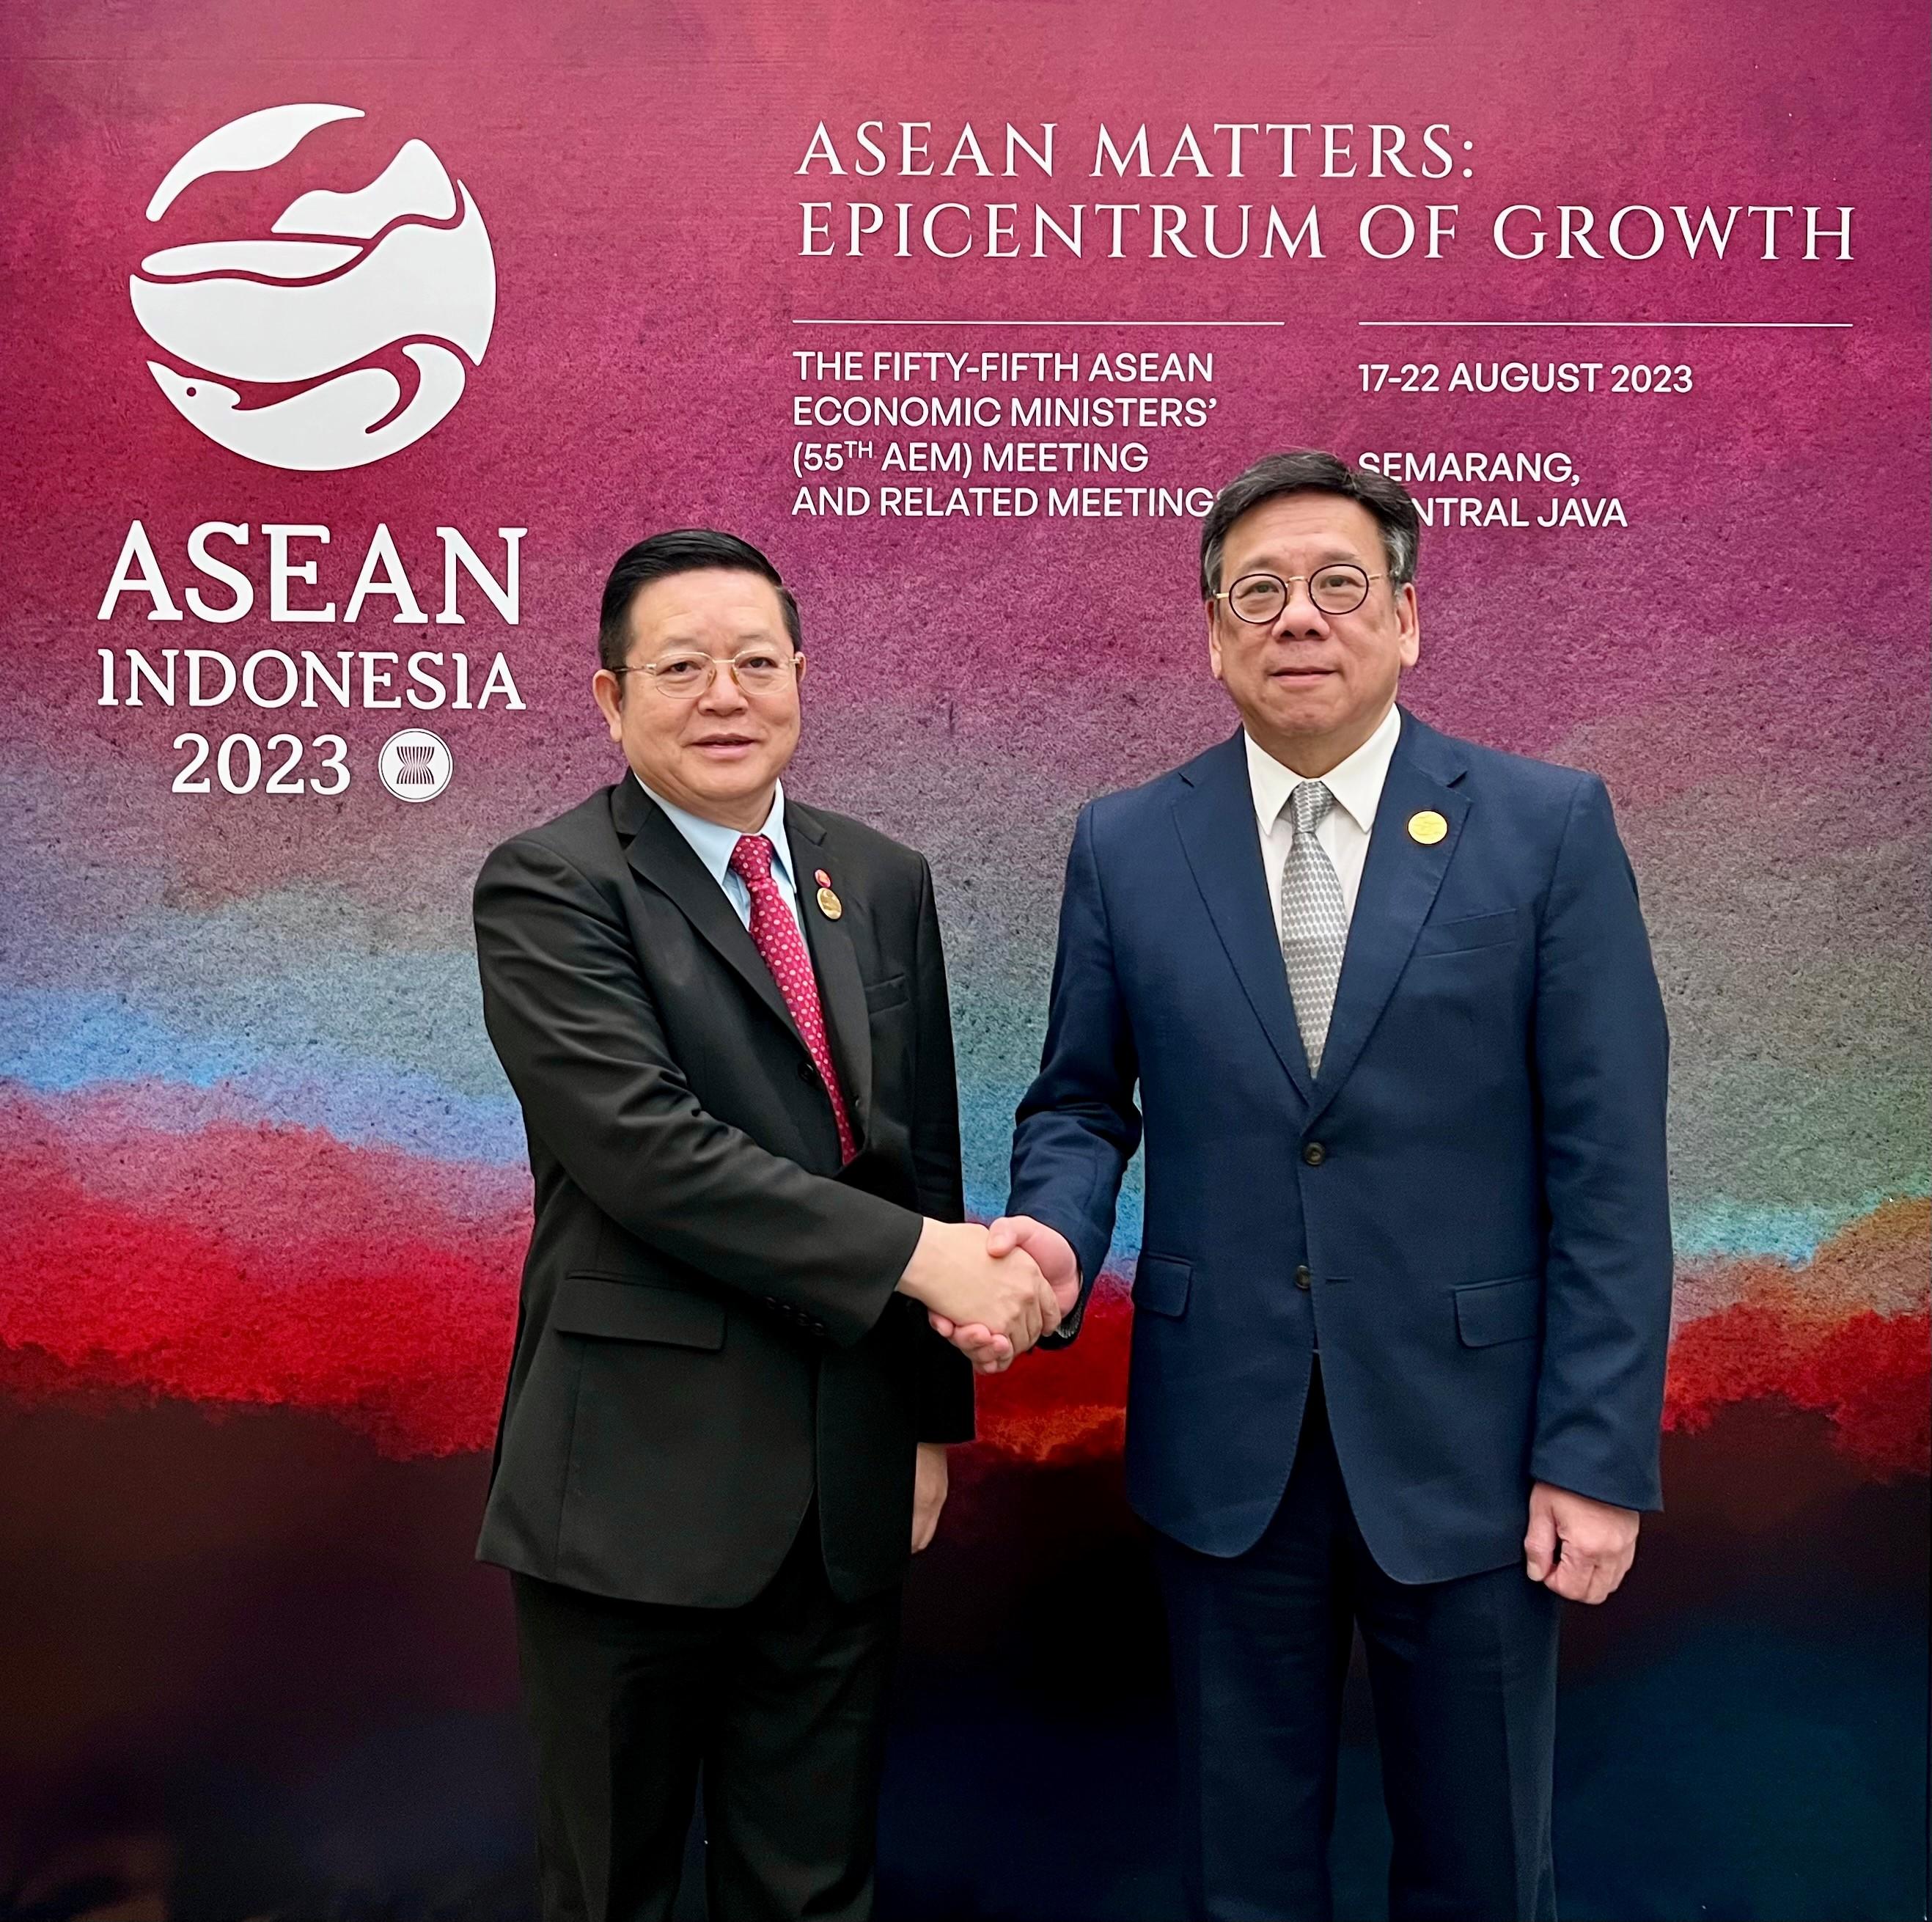 The Secretary for Commerce and Economic Development, Mr Algernon Yau (right), has a bilateral meeting with the Secretary-General of the Association of Southeast Asian Nations, Dr Kao Kim Hourn (left), in Semarang, Indonesia, today (August 20) to discuss various trade and economic issues, and update him on Hong Kong's preparatory work in seeking early accession to the Regional Comprehensive Economic Partnership.